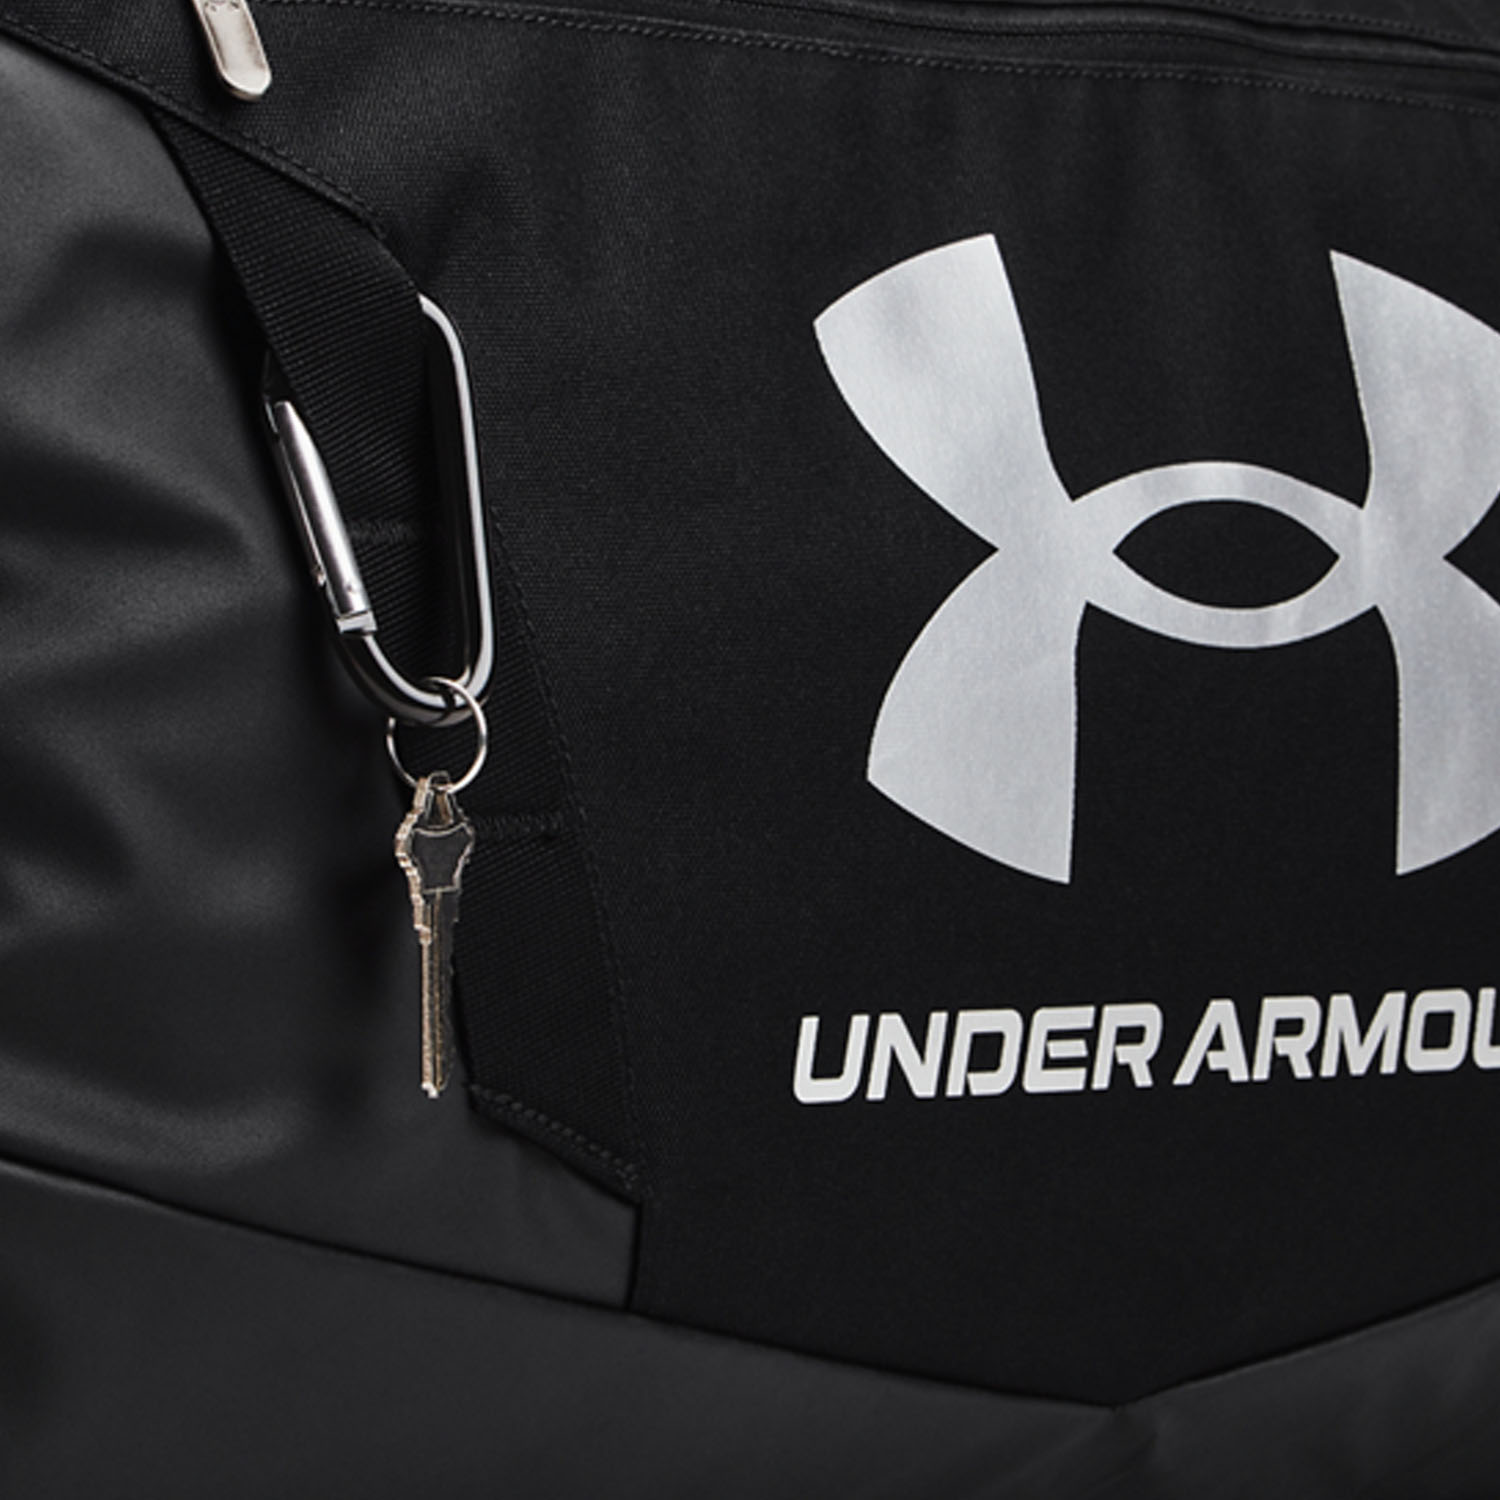 Under Armour Undeniable 5.0 Large Duffle - Black/Metallic Silver